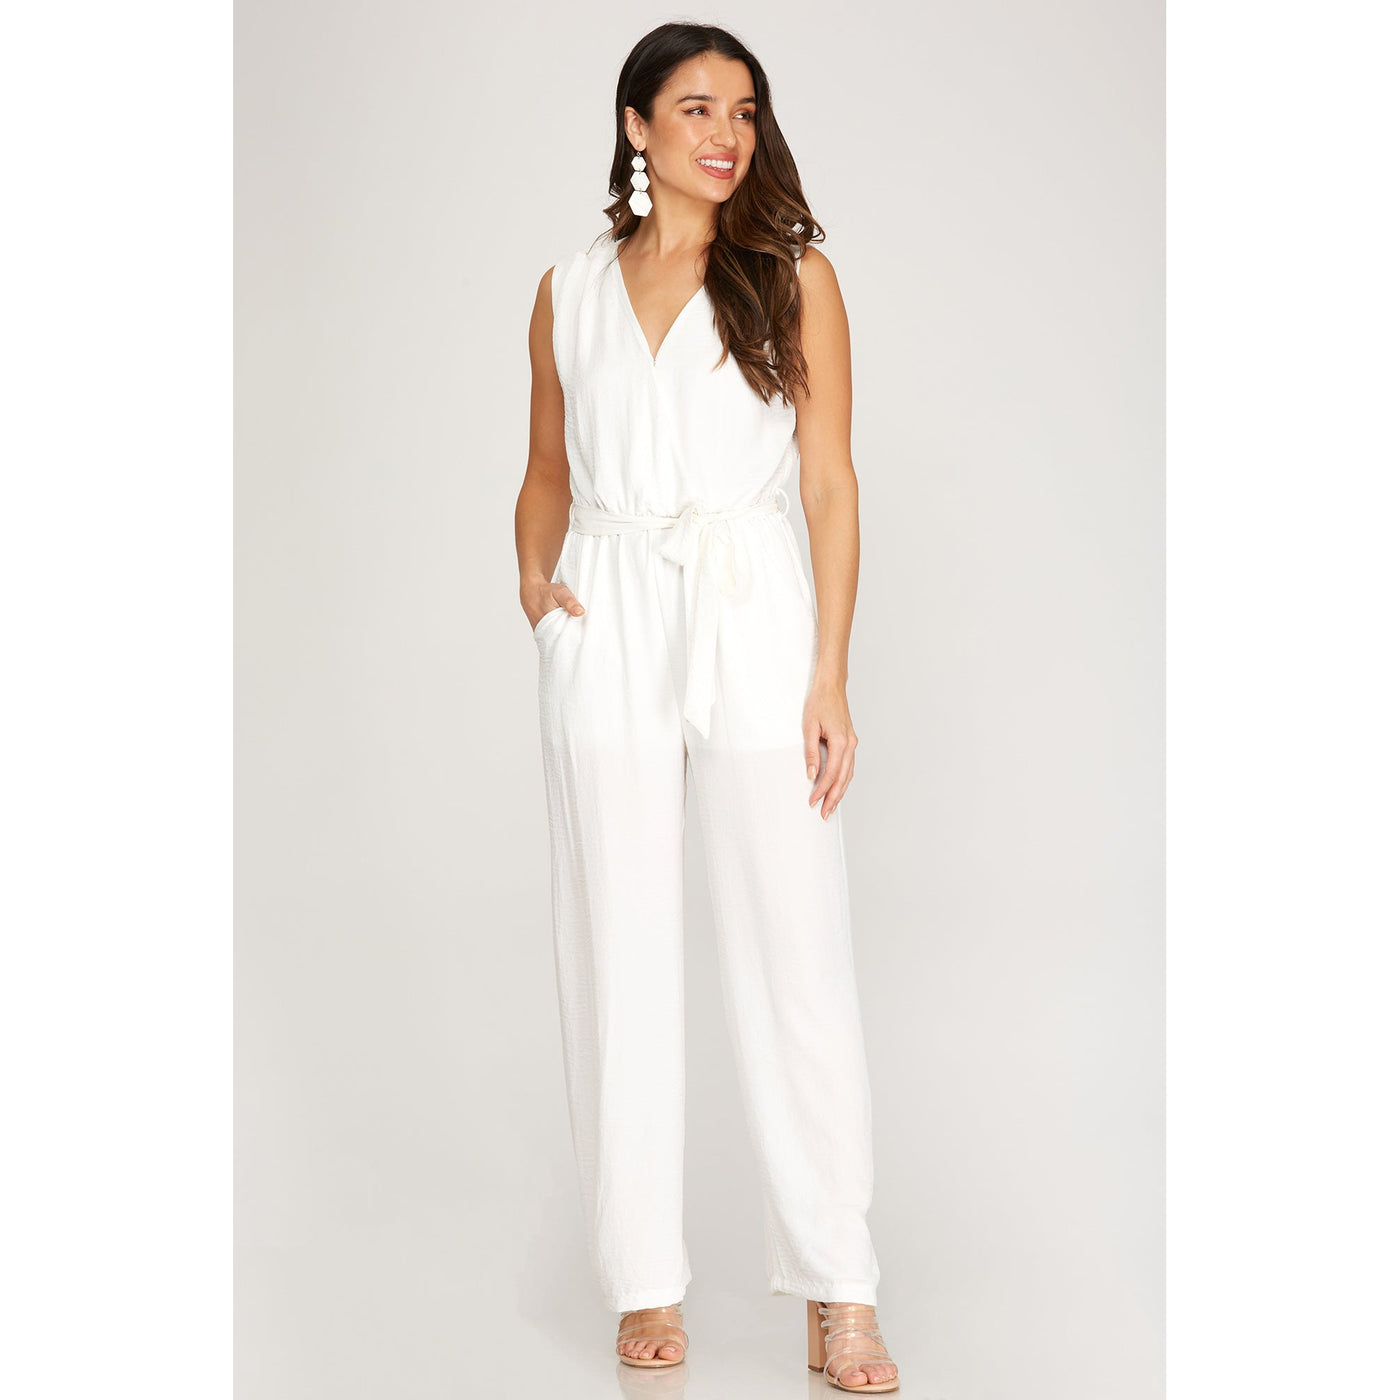 Pardon Me Jumpsuit in White-W Romper-Graceful & Chic Boutique, Family Clothing Store in Waxahachie, Texas